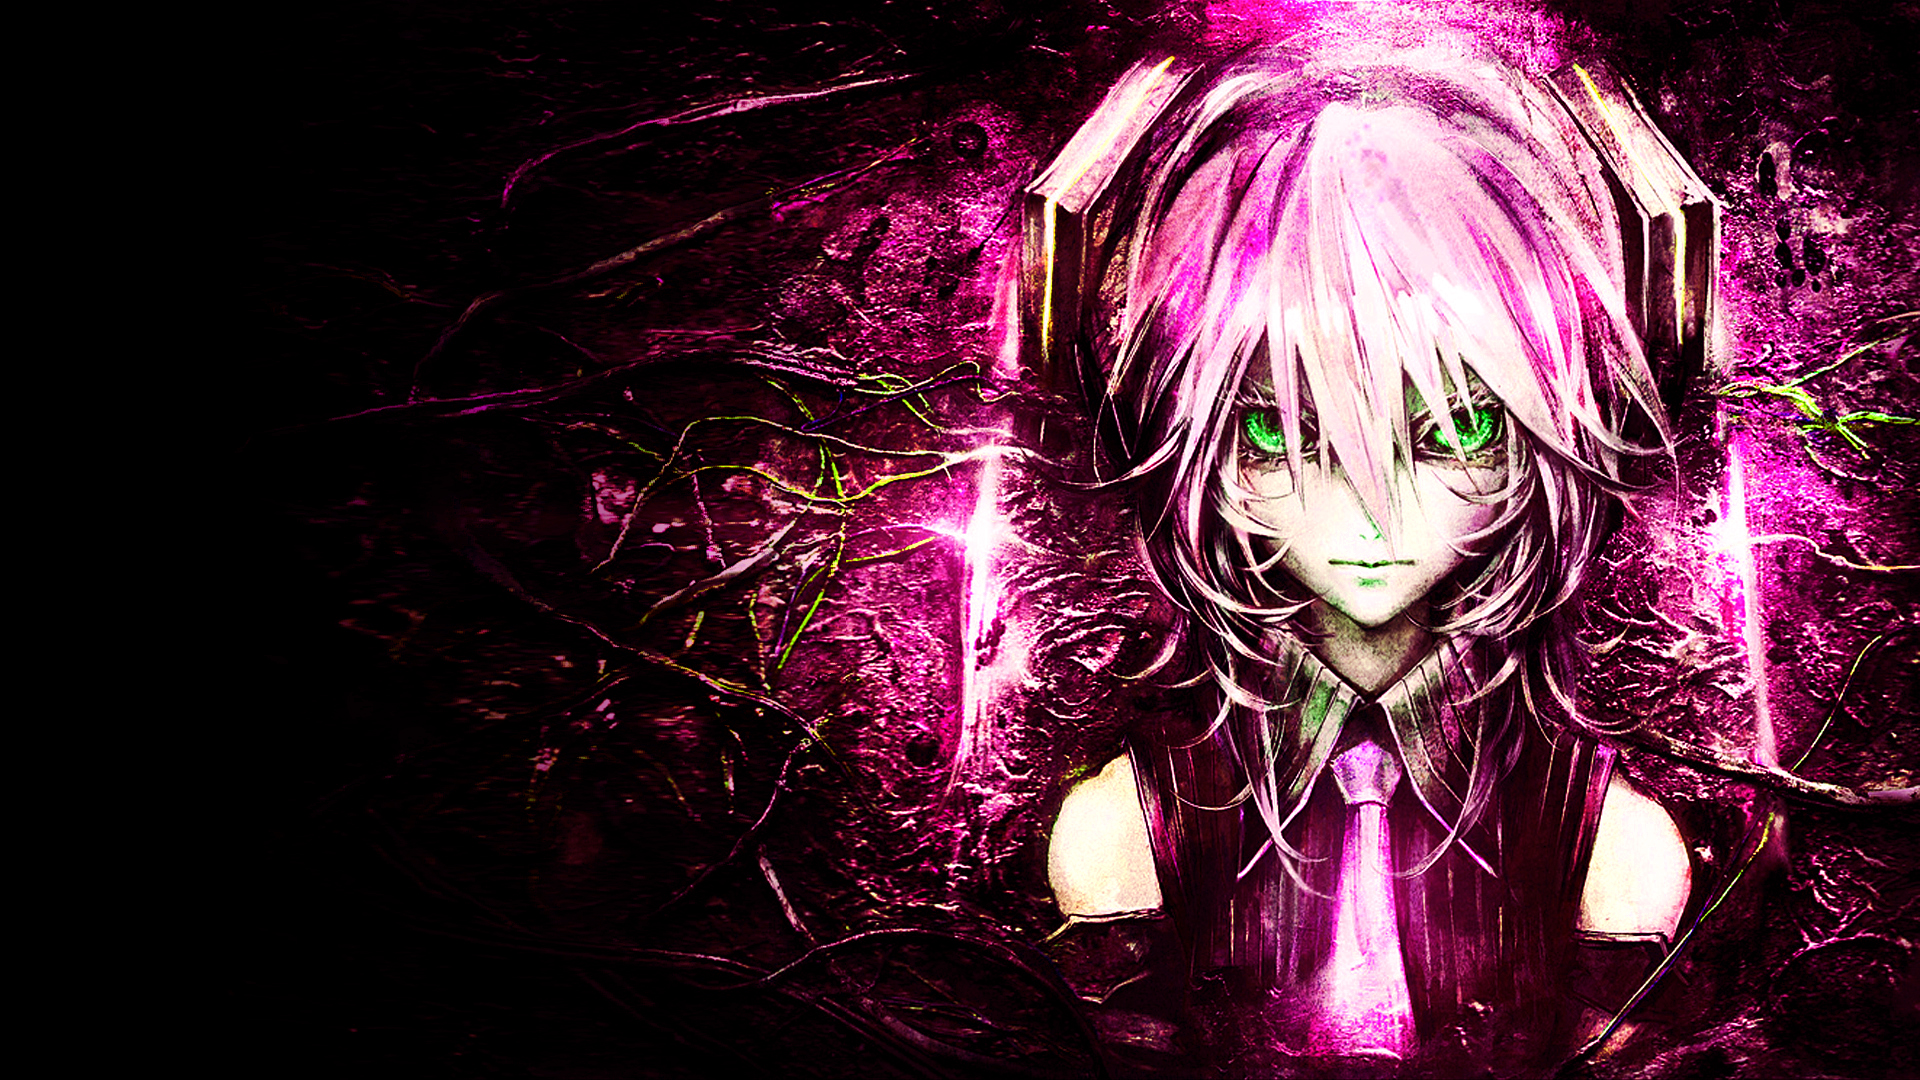 Hatsune Miku with green eyes and pink hair on a light background.